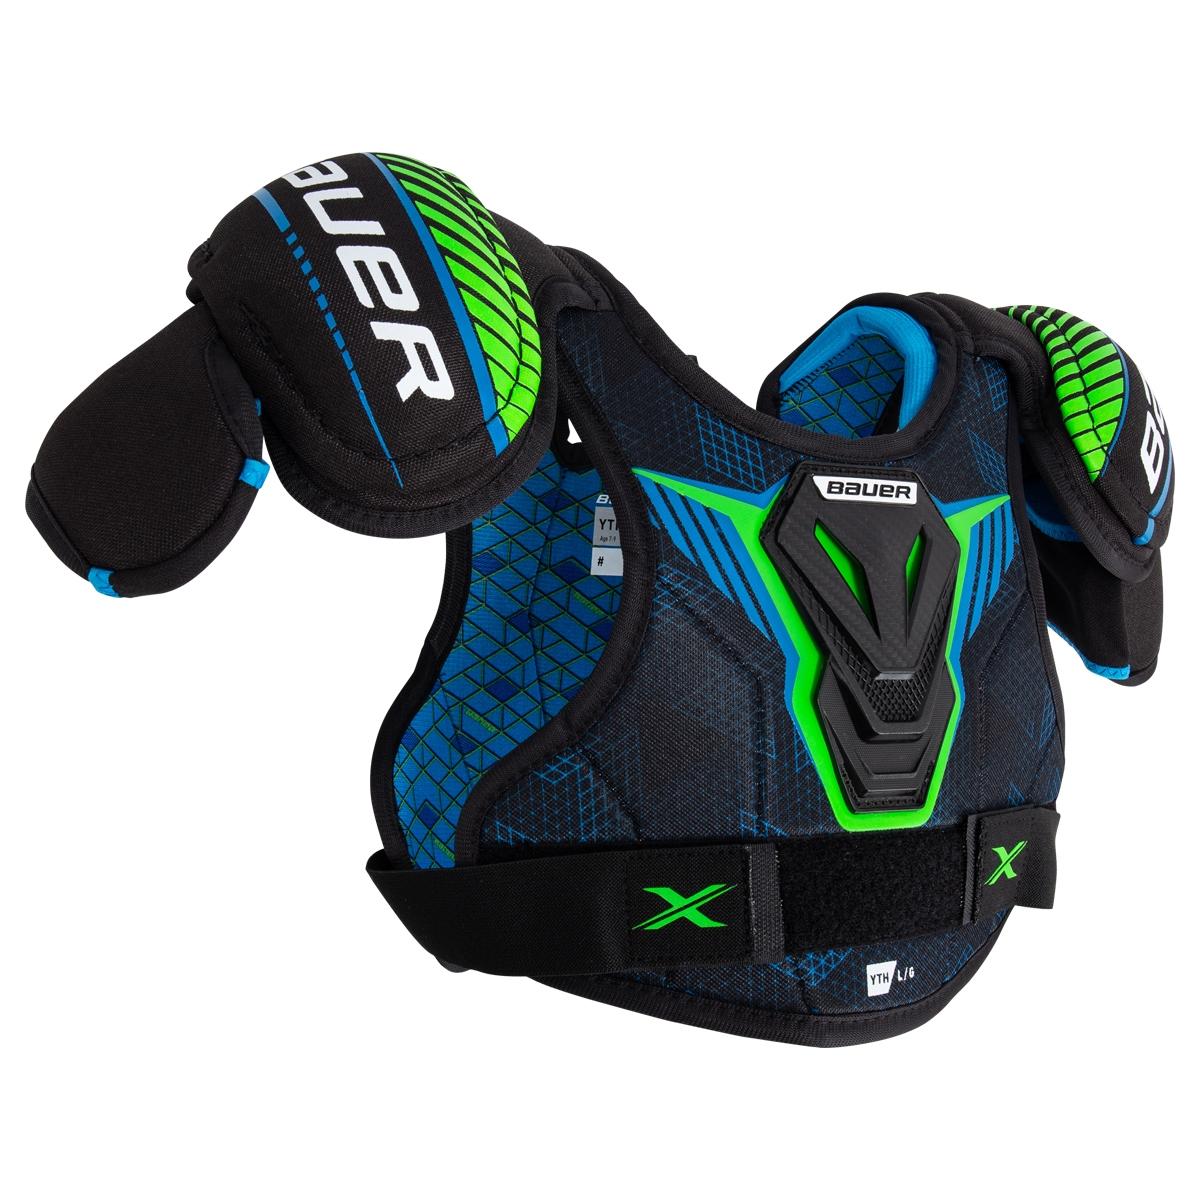 Bauer X Yth. Shoulder Padsproduct zoom image #2